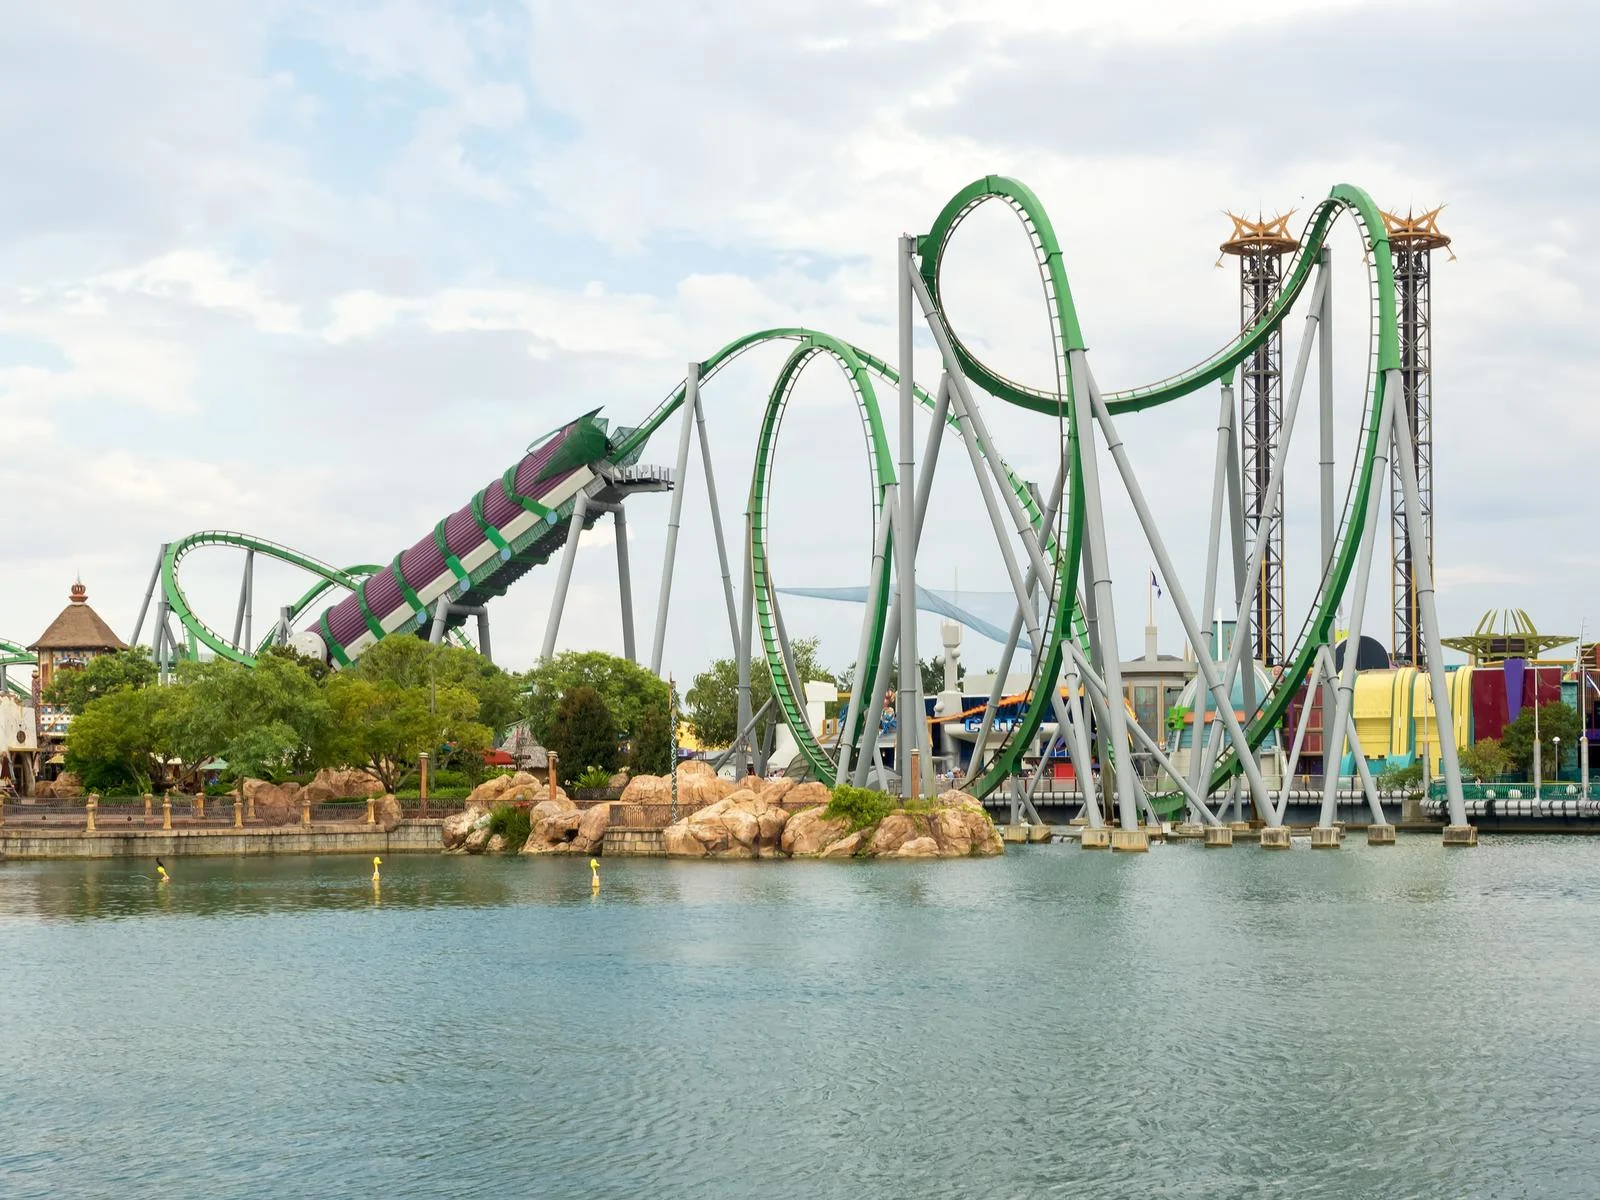 The green Hulk Rollercoaster crossing a pool at Universal Studios in Orlando, Florida, one of the best roller coaster parks in the US